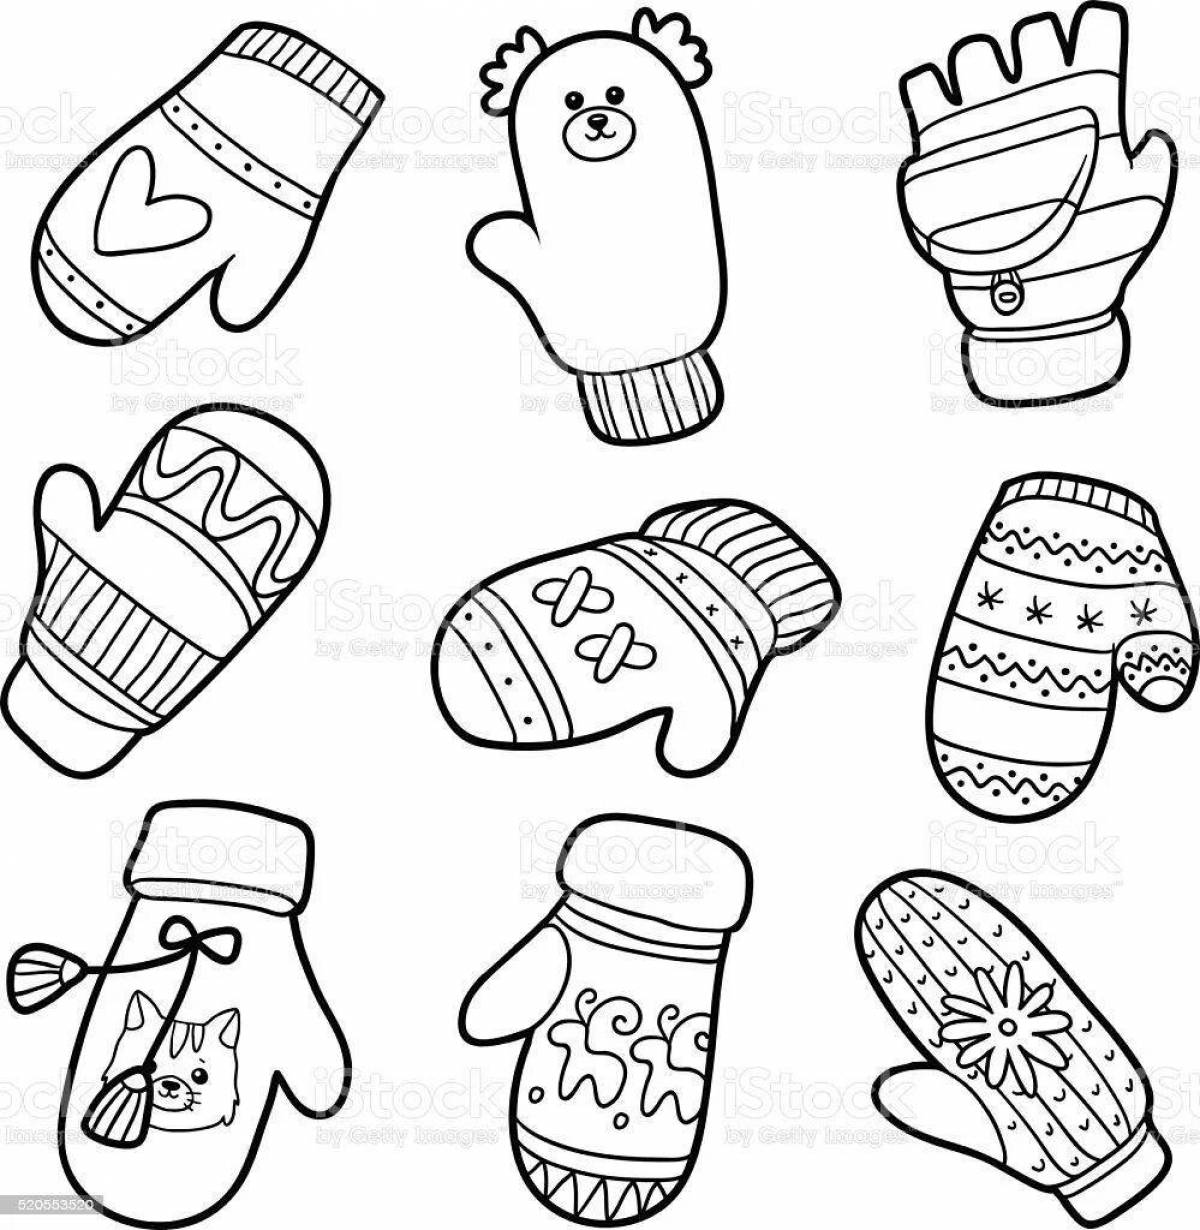 Colorful patterned mittens coloring book for kids